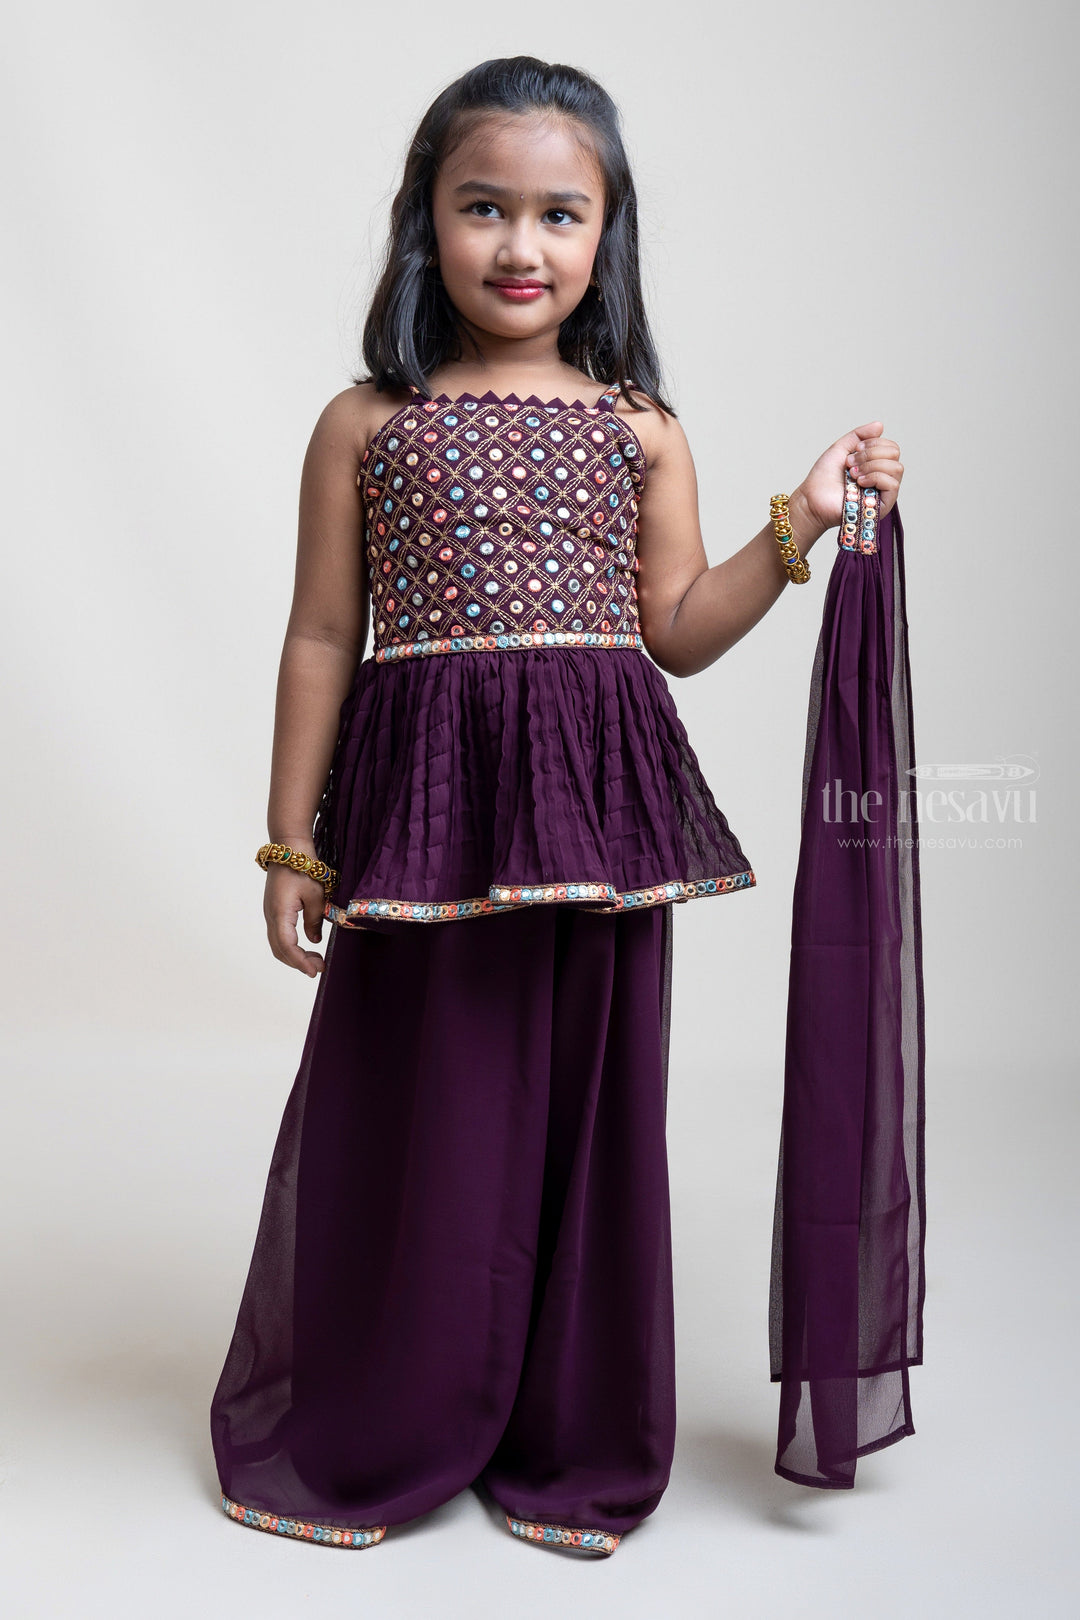 The Nesavu Girls Sharara / Plazo Set Maroon Palazzo With Embroidery Sequenced Tunic Tops For Girls Nesavu Designer Palazzo Suit For Girls| Sankranti Special Arrival| The Nesavu